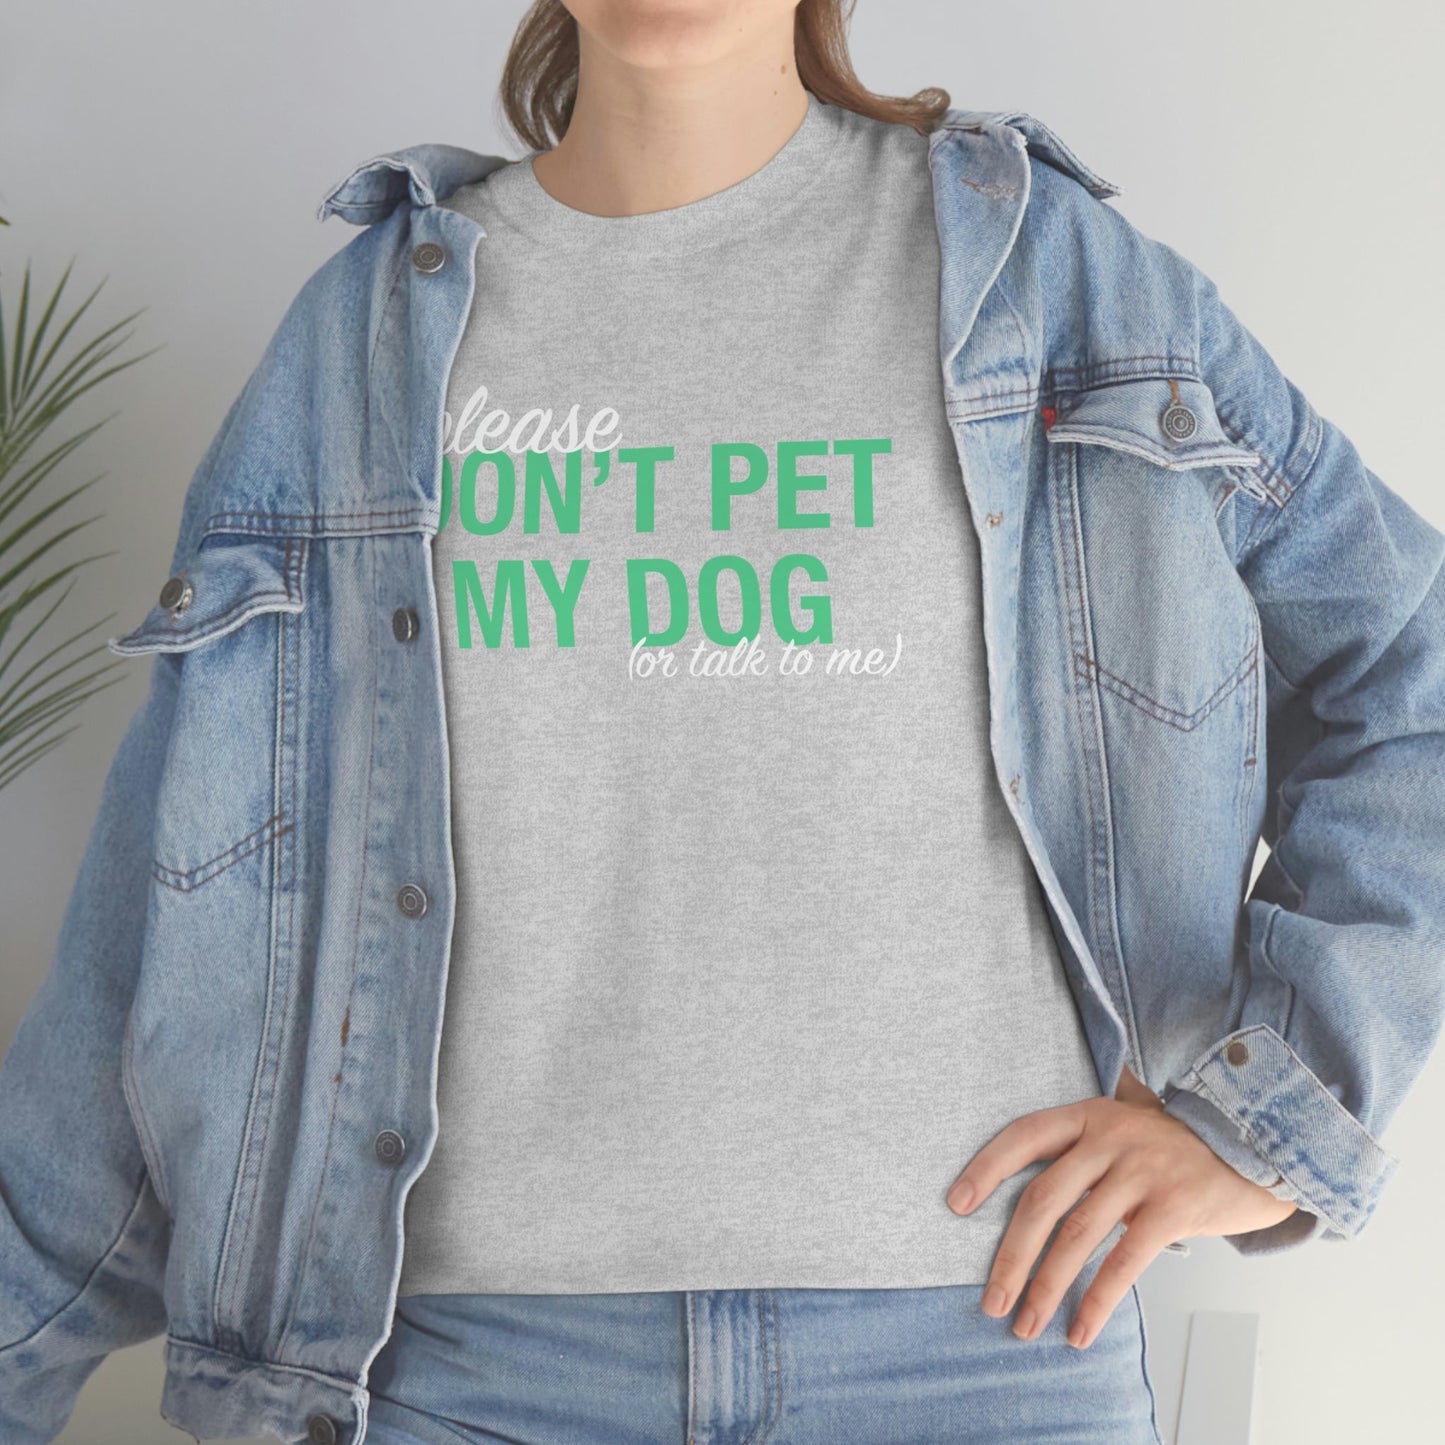 Please Don't Pet My Dog (Or Talk To Me) | Text Tees - Detezi Designs-22788290546849604082